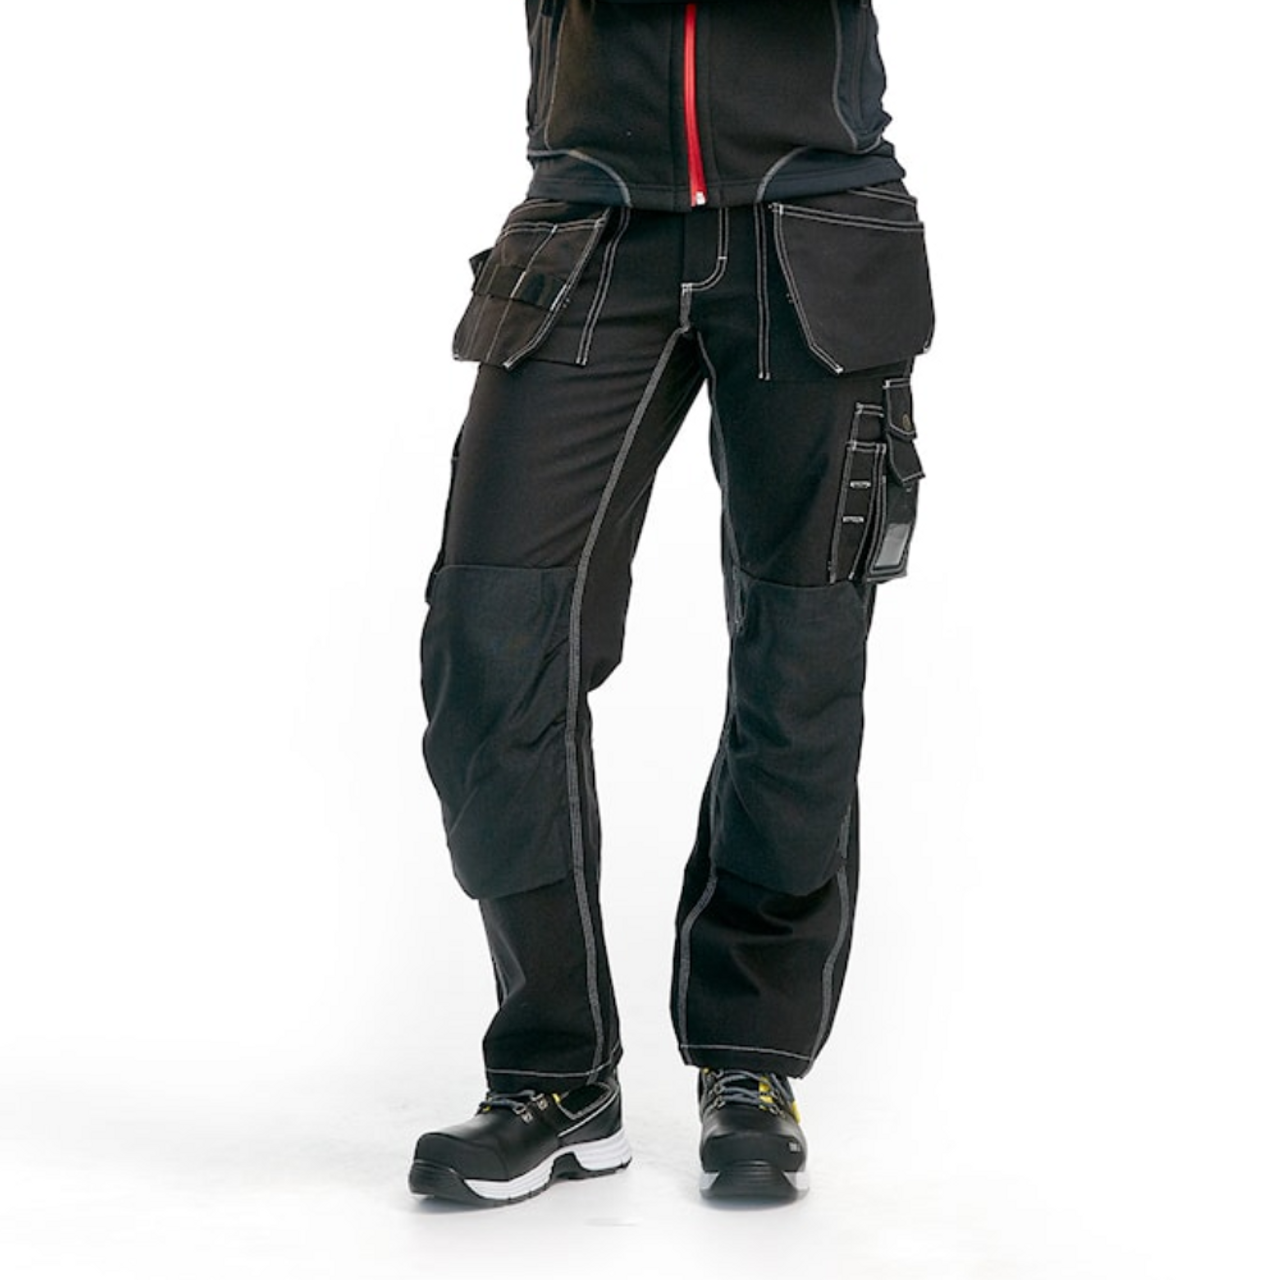 Craftsman Hardware supplies BLAKLADER workwear range including Trousers for women with Holster Pockets for the Carpentry to support Women in Construction in Sydney